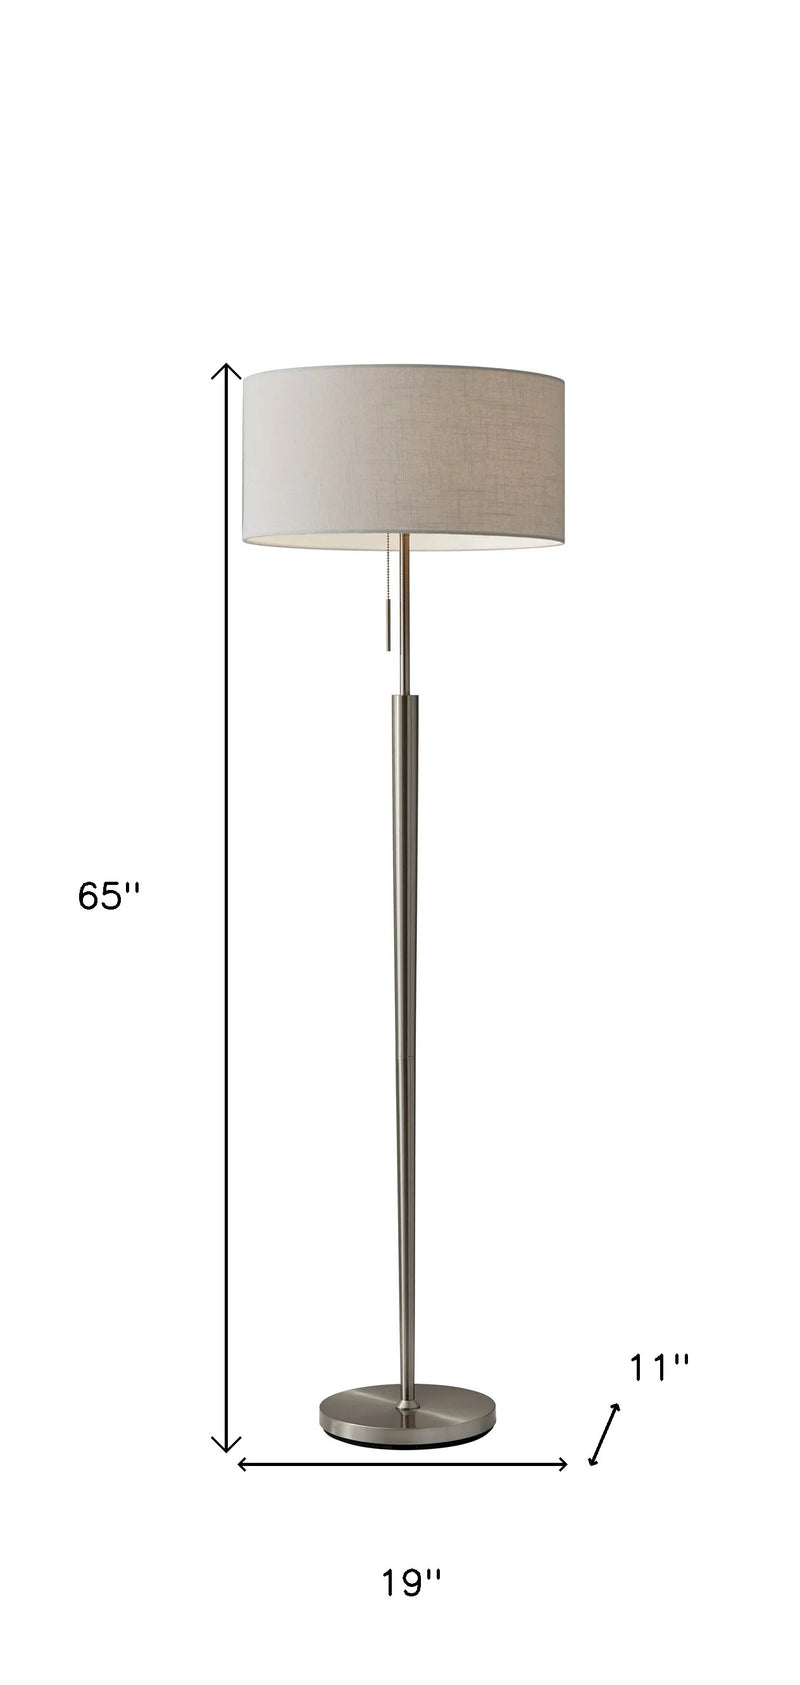 65" Traditional Shaped Floor Lamp With Off-White Drum Shade